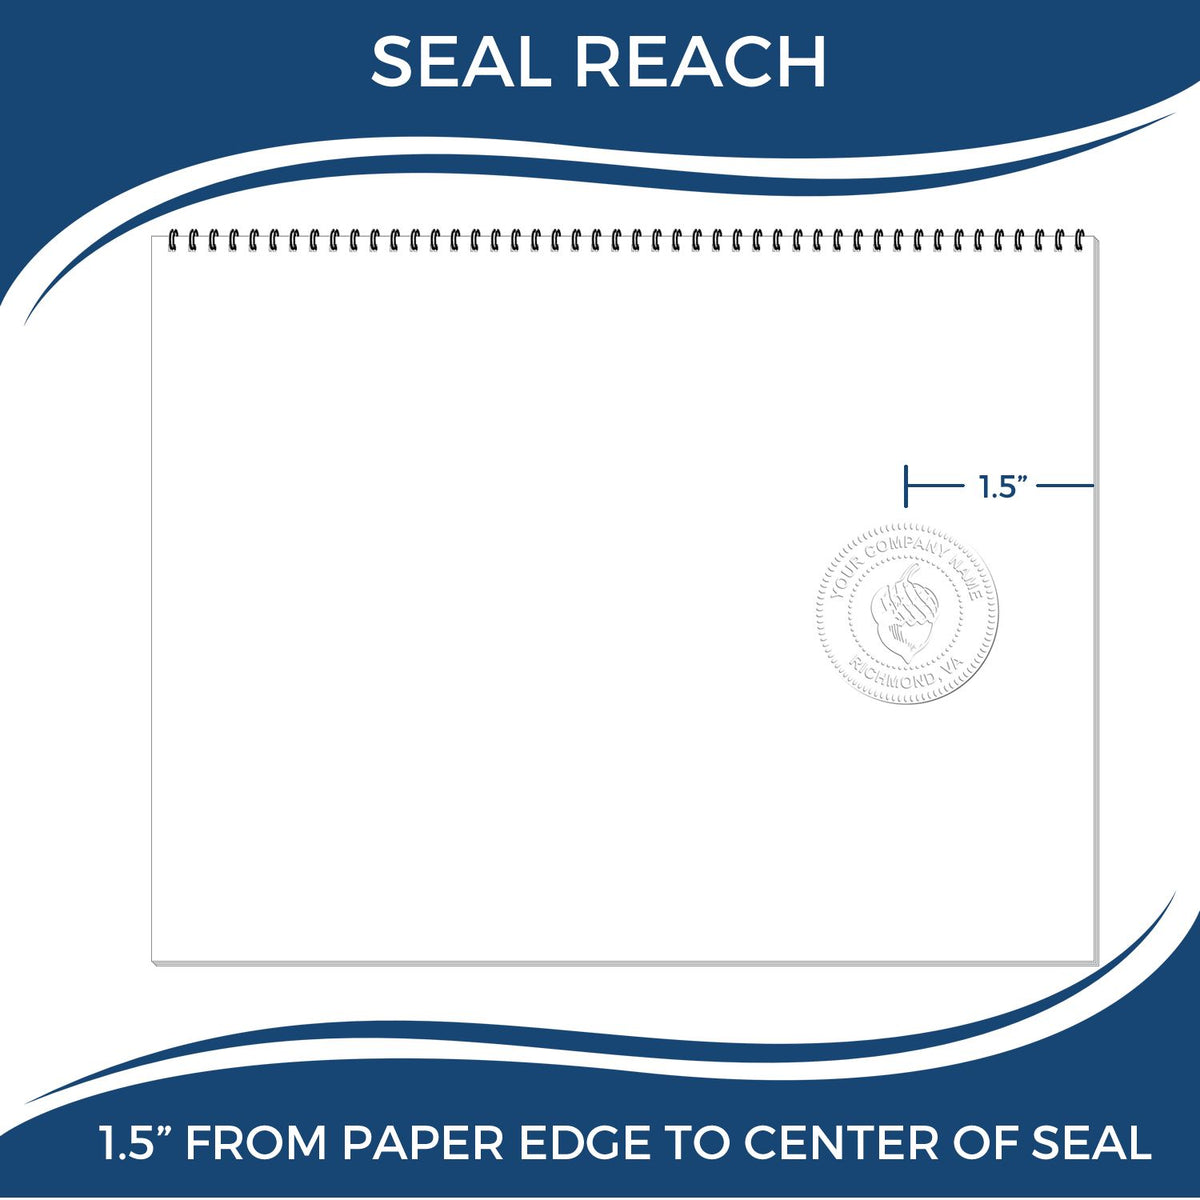 An infographic showing the seal reach which is represented by a ruler and a miniature seal image of the Arizona Engineer Desk Seal